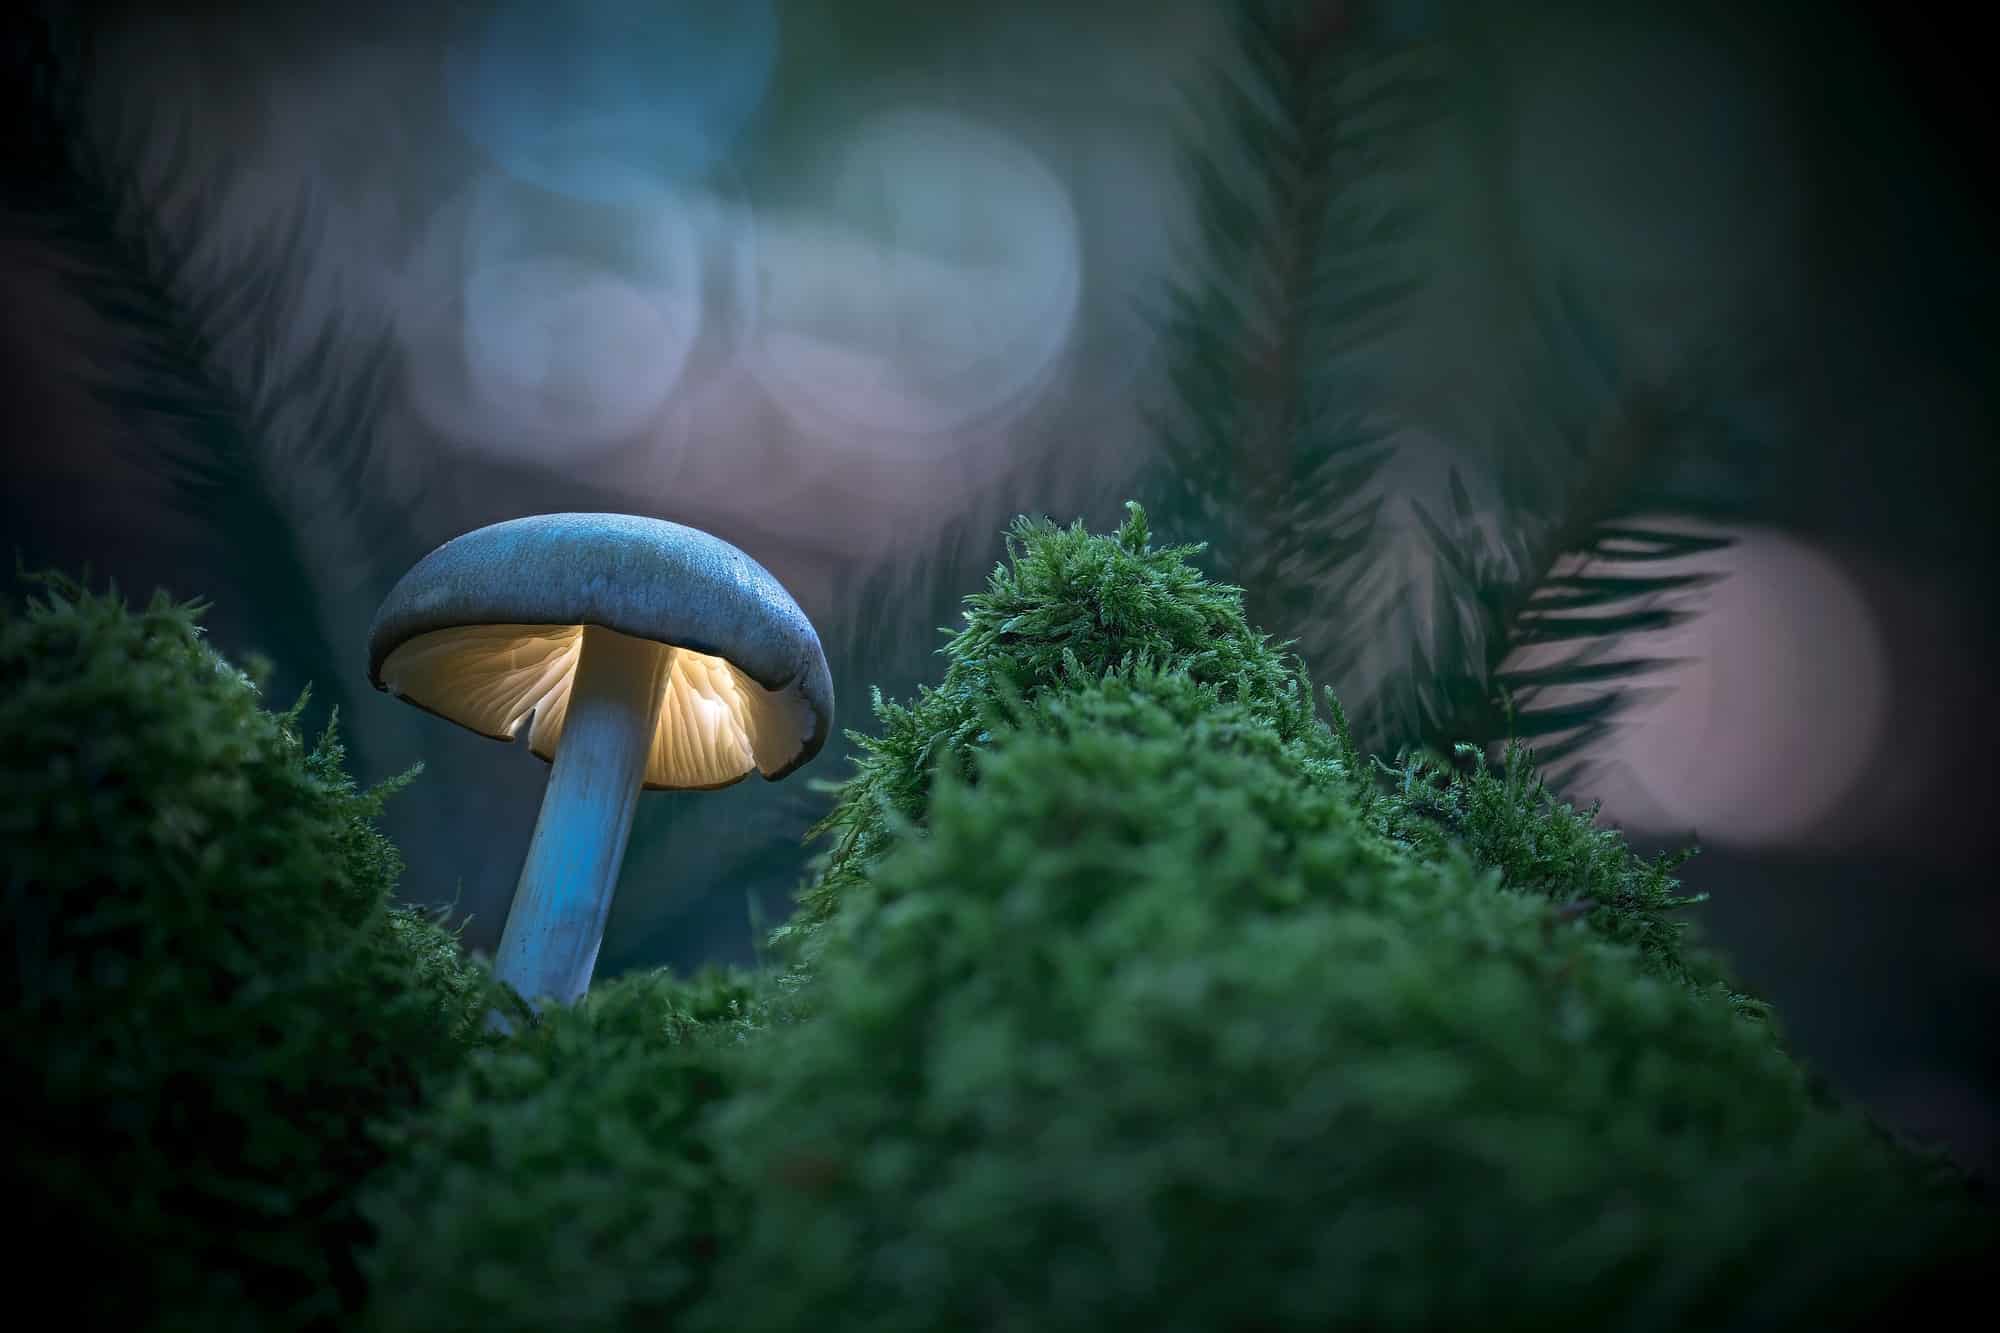 Mushroom, glowing fantasy world in the evening forest